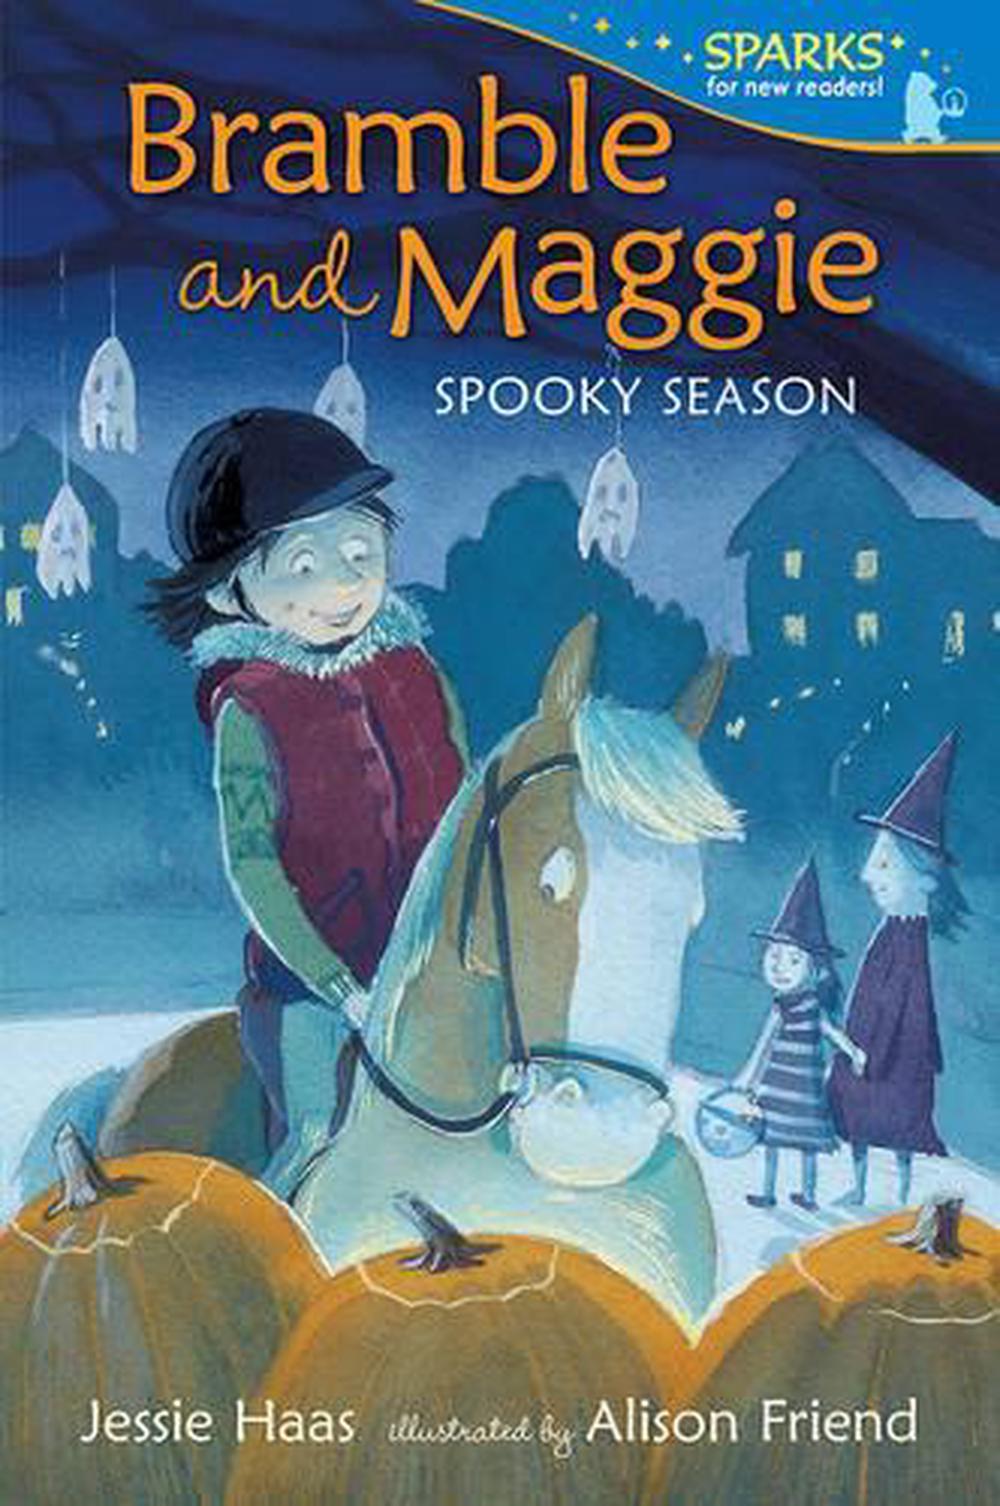 Bramble and Maggie Spooky Season by Jessie Haas (English) Paperback ...